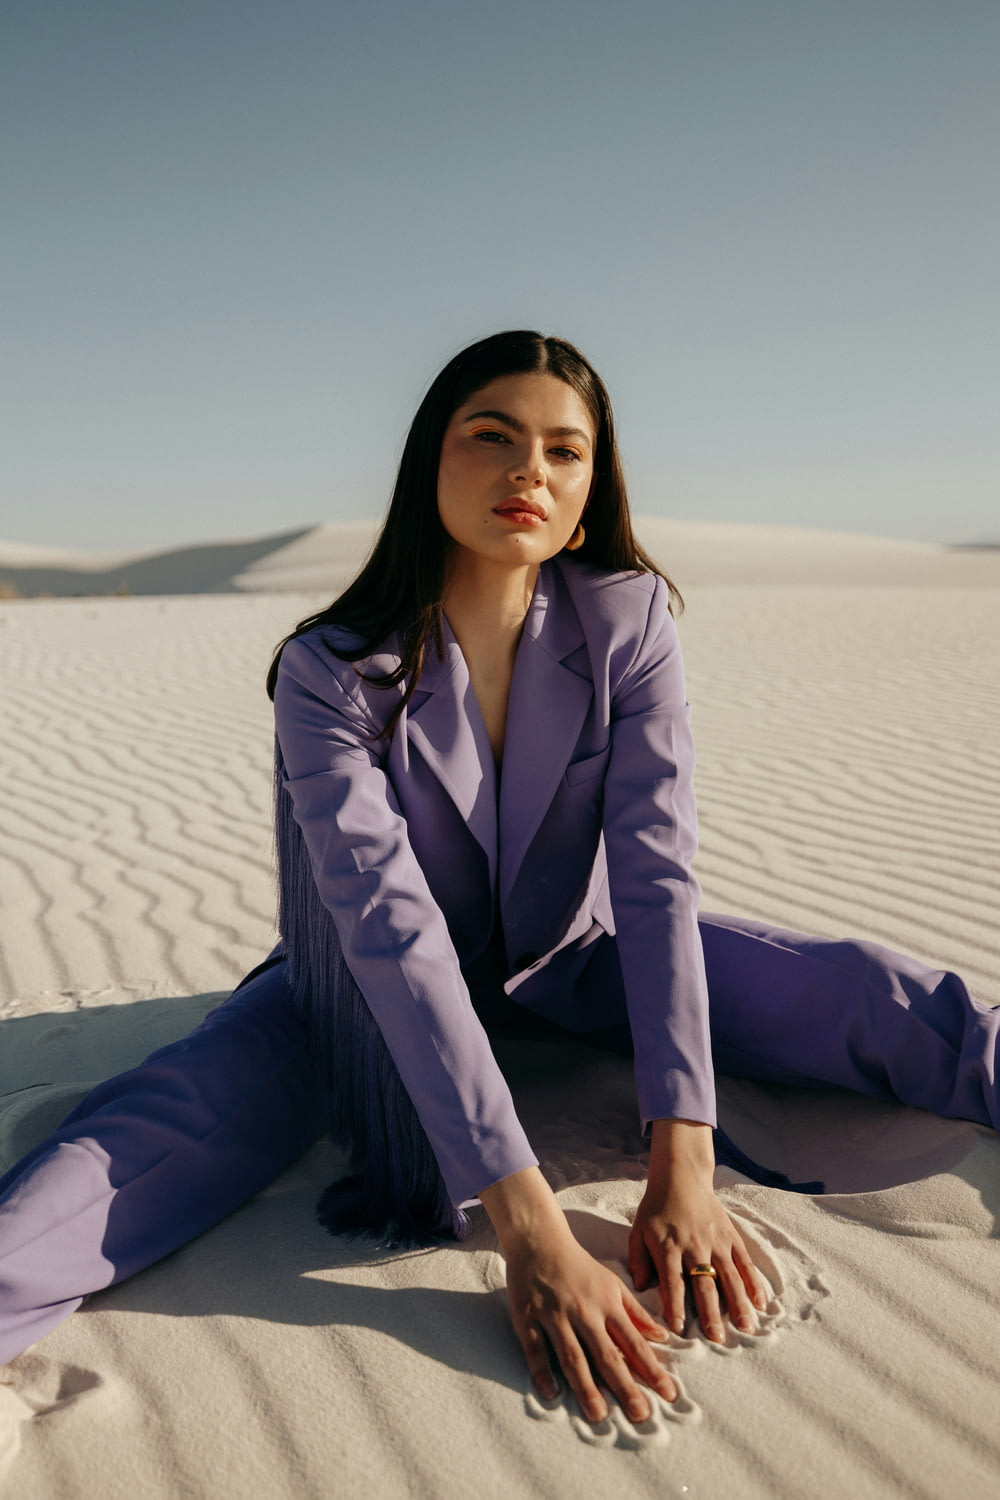 a woman in a purple suit sitting in the sand